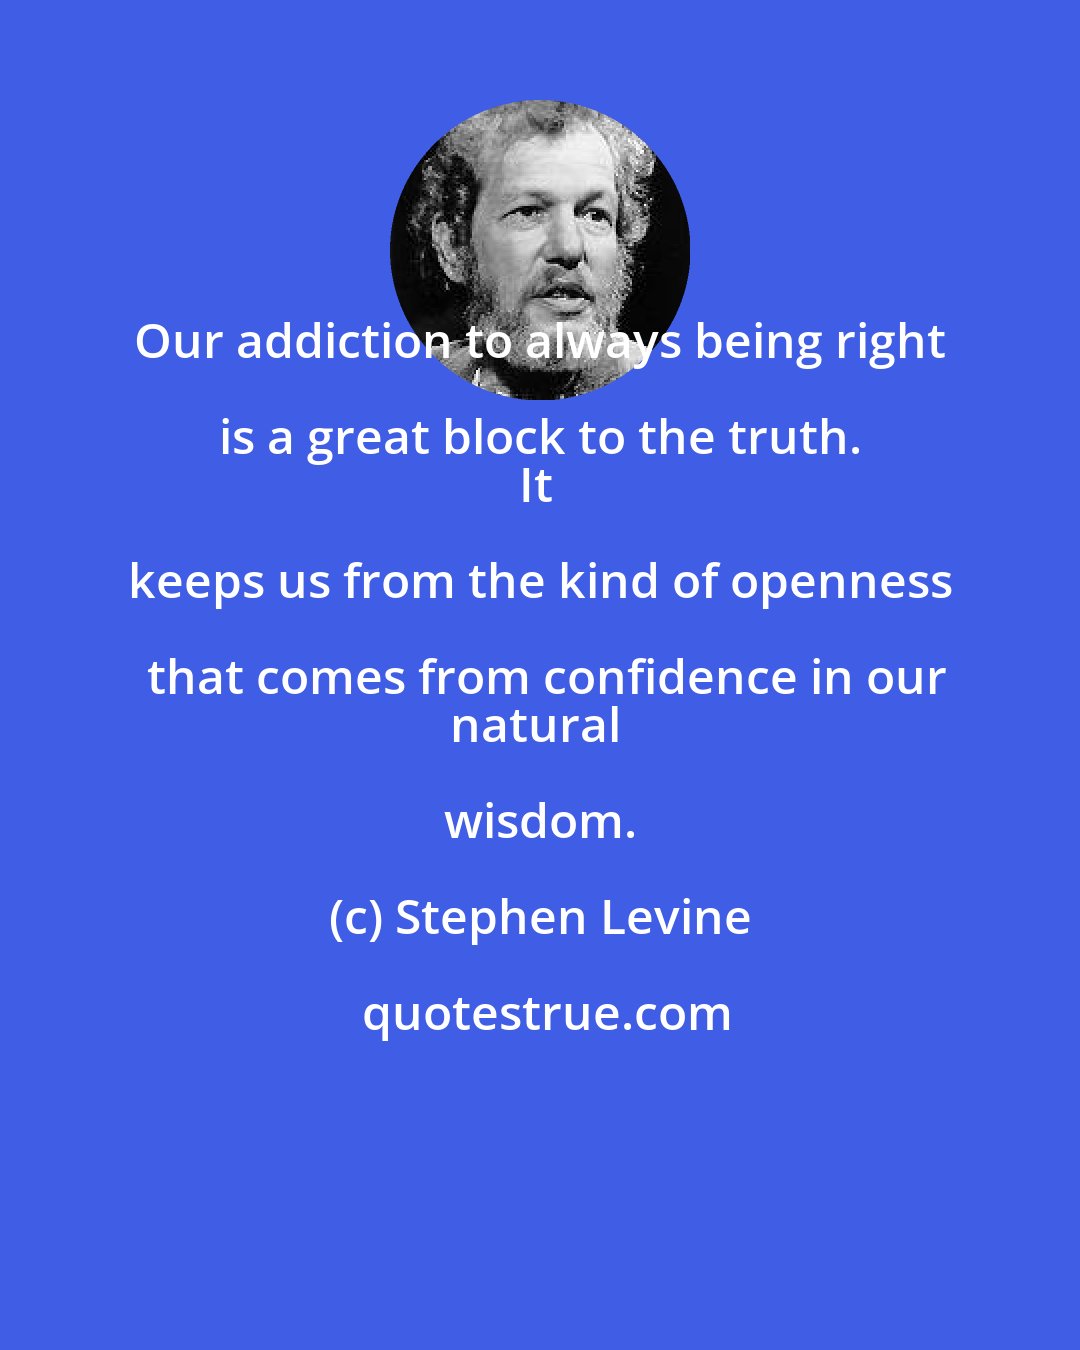 Stephen Levine: Our addiction to always being right is a great block to the truth. 
It keeps us from the kind of openness that comes from confidence in our
natural wisdom.